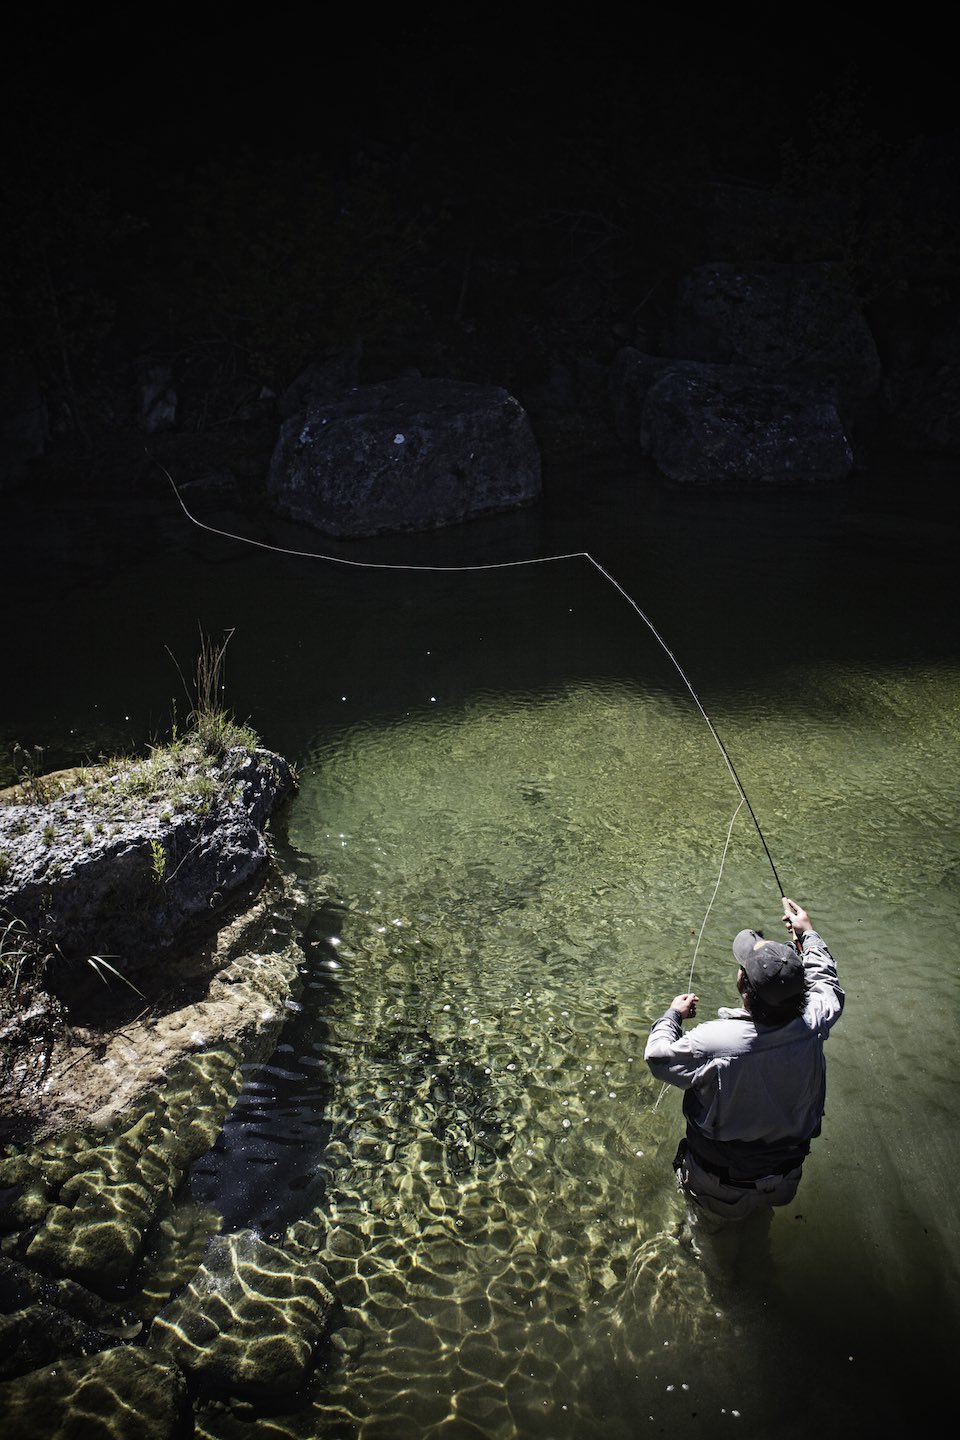 Fisherman casting a line while standing in shallow water. 